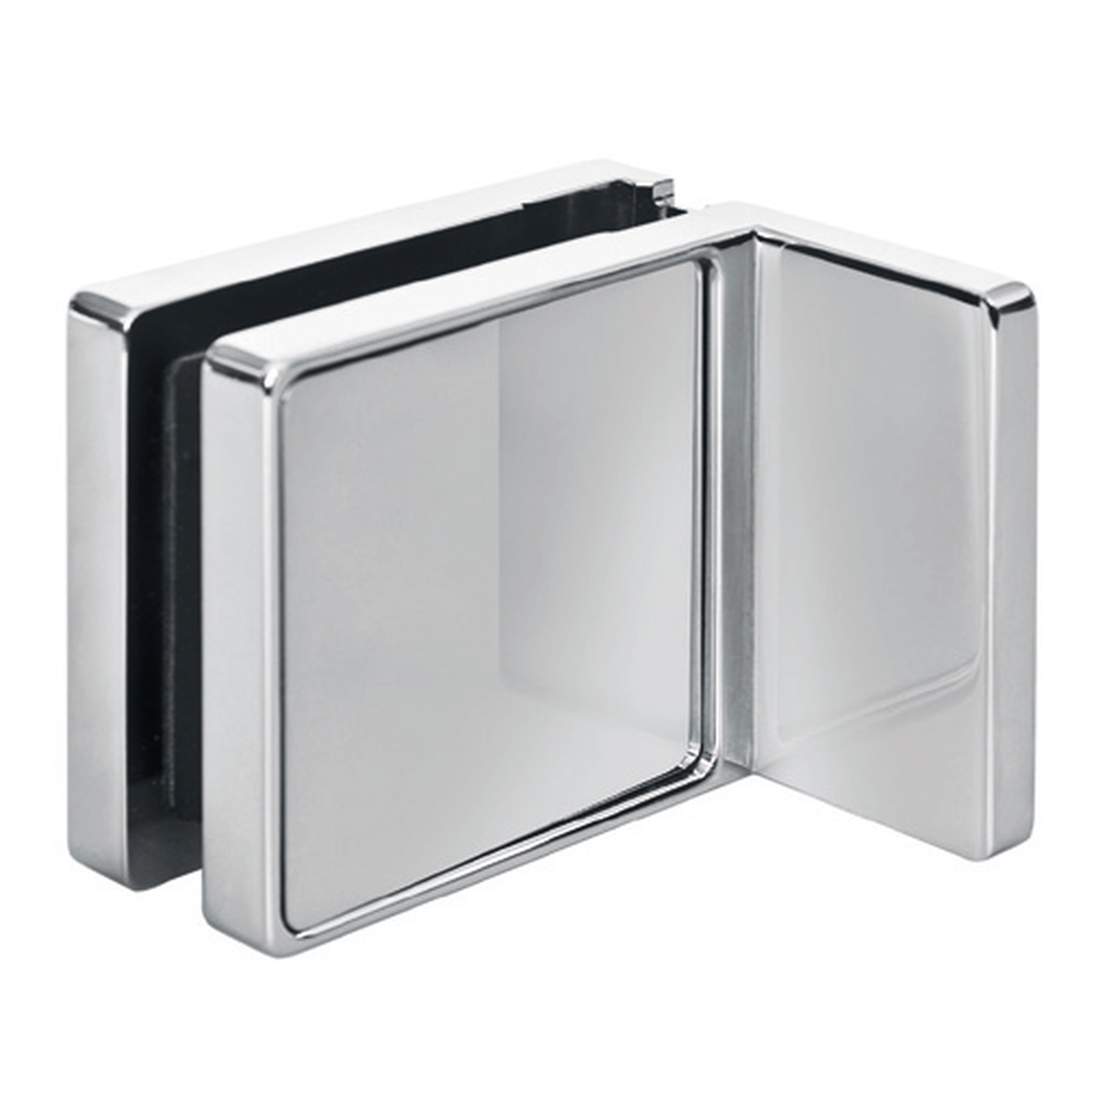 STYLIT 90° CONNECTOR I GLASS - WALL, DIN RIGHT/DIN LEFT